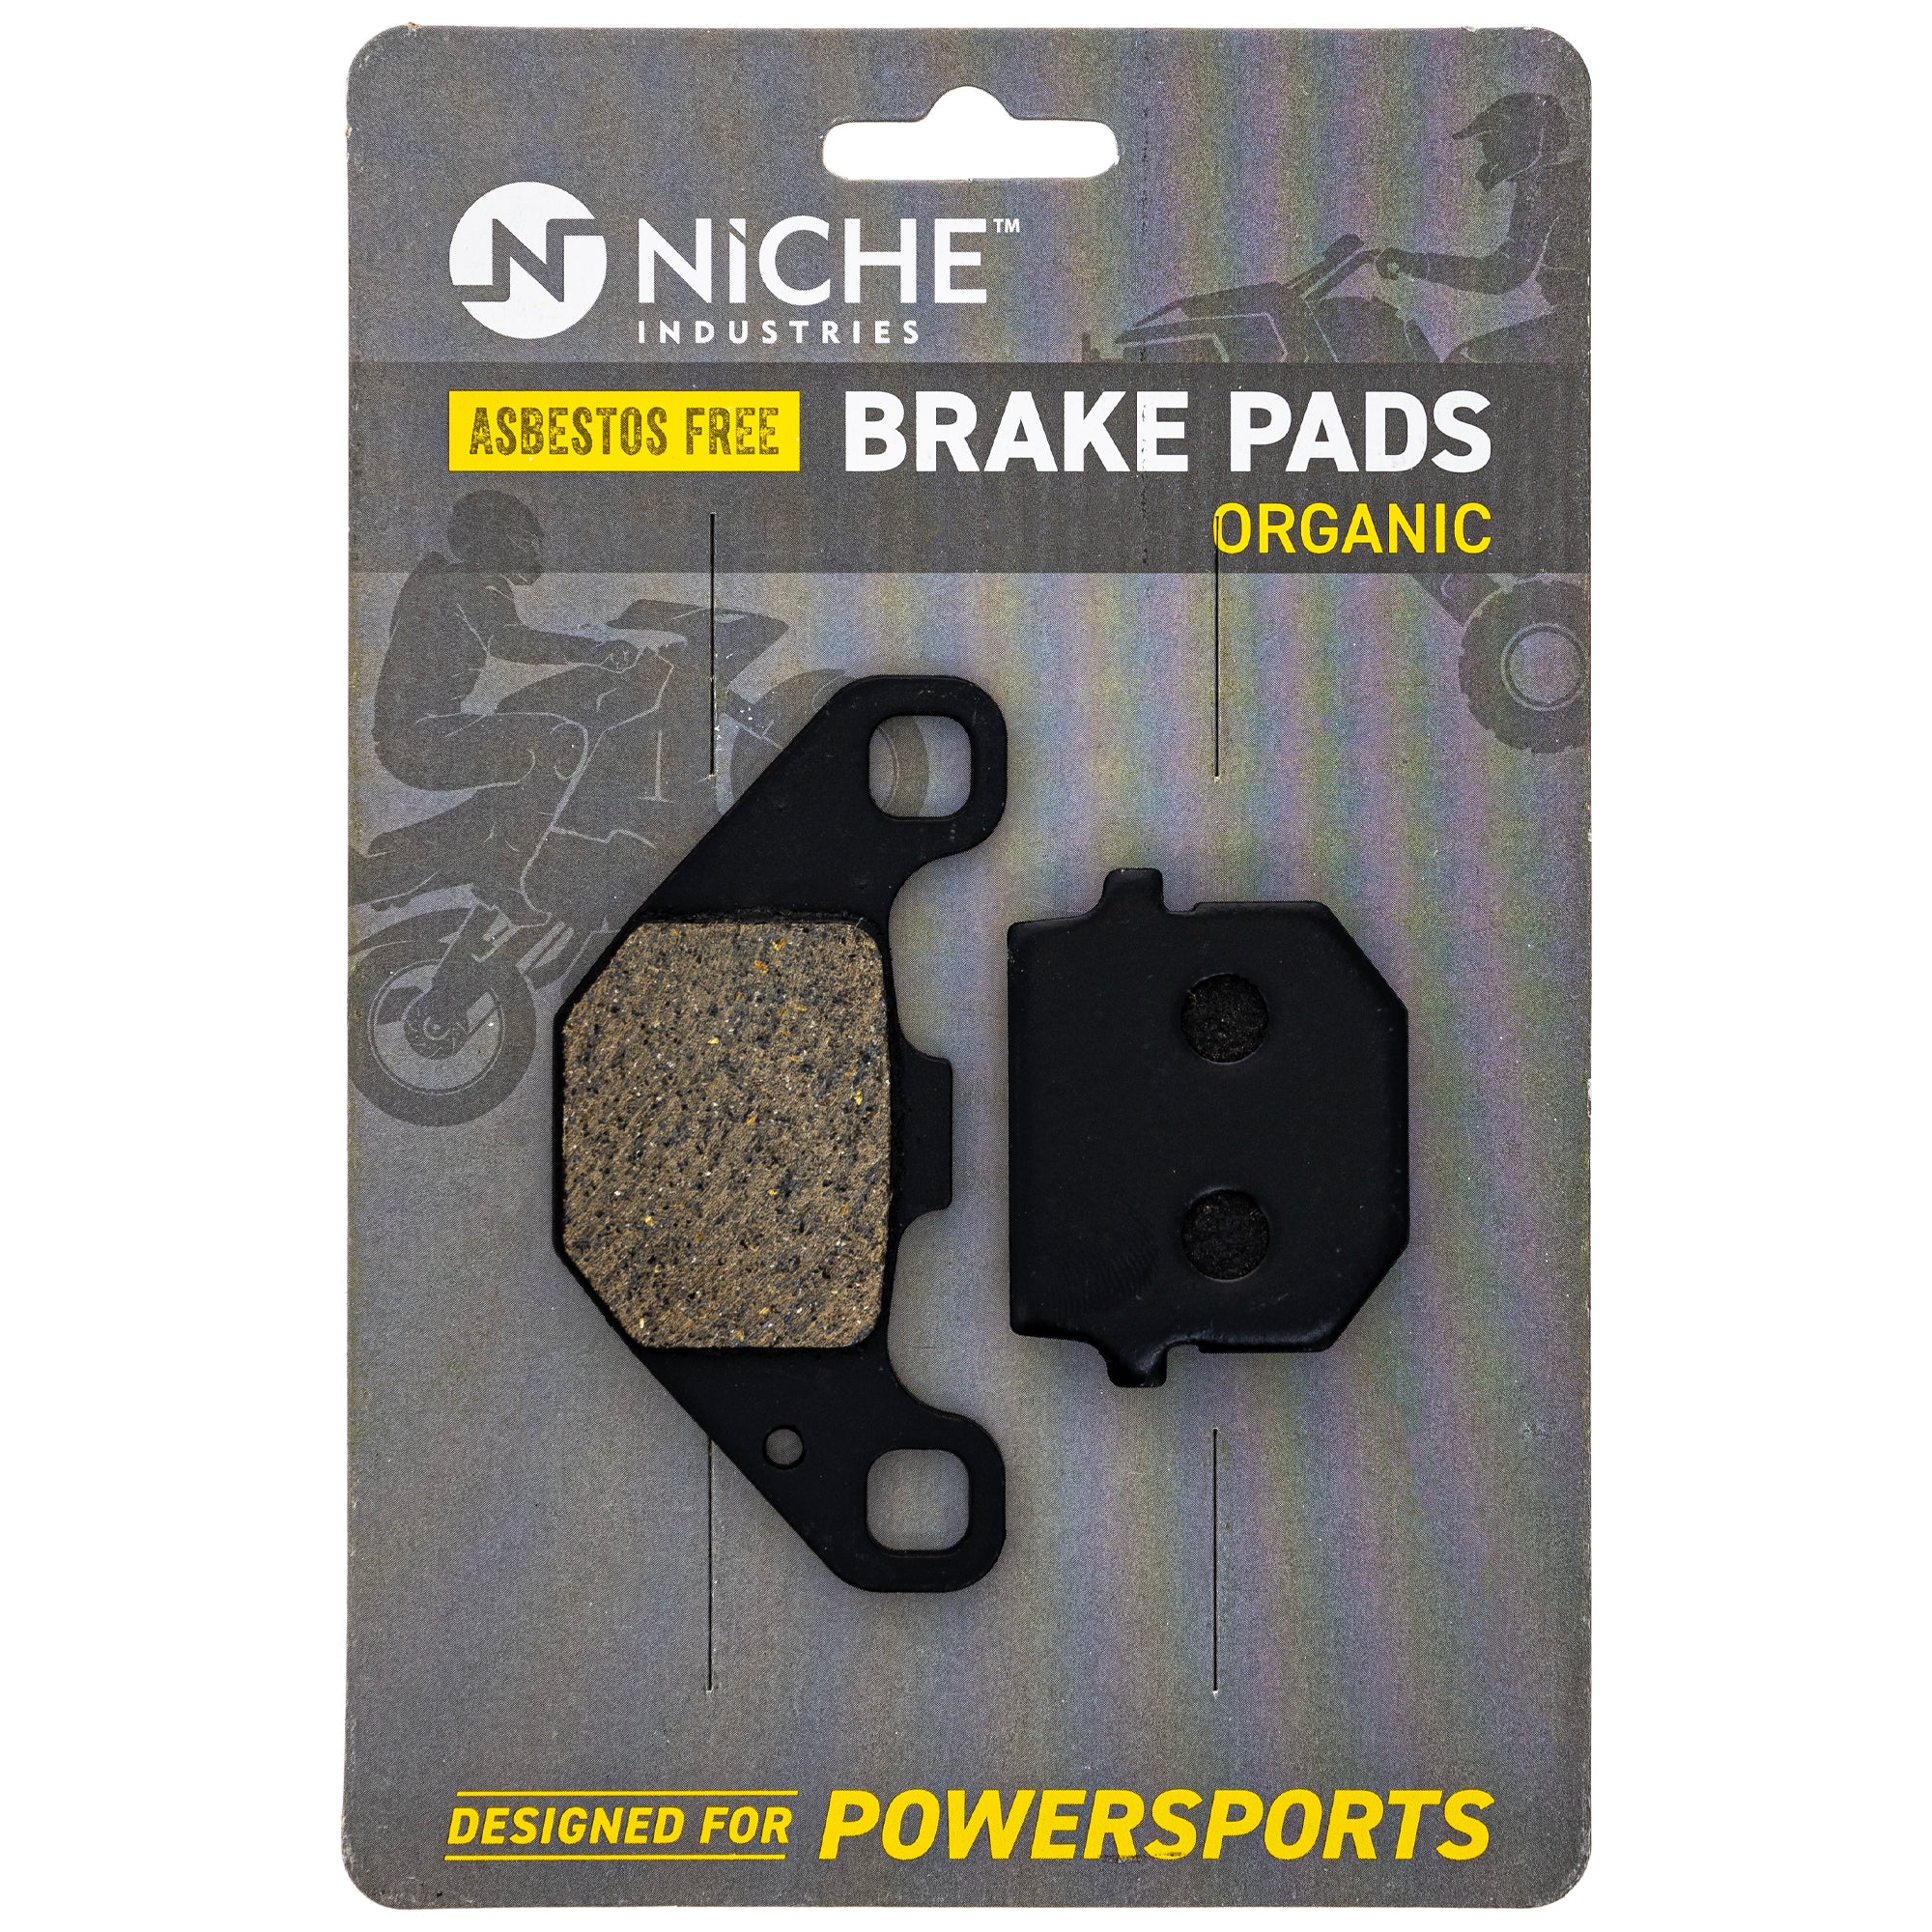 Brake Pad Kit for Yamaha Grizzly 300 1SC-F5806-00 Front Rear Organic